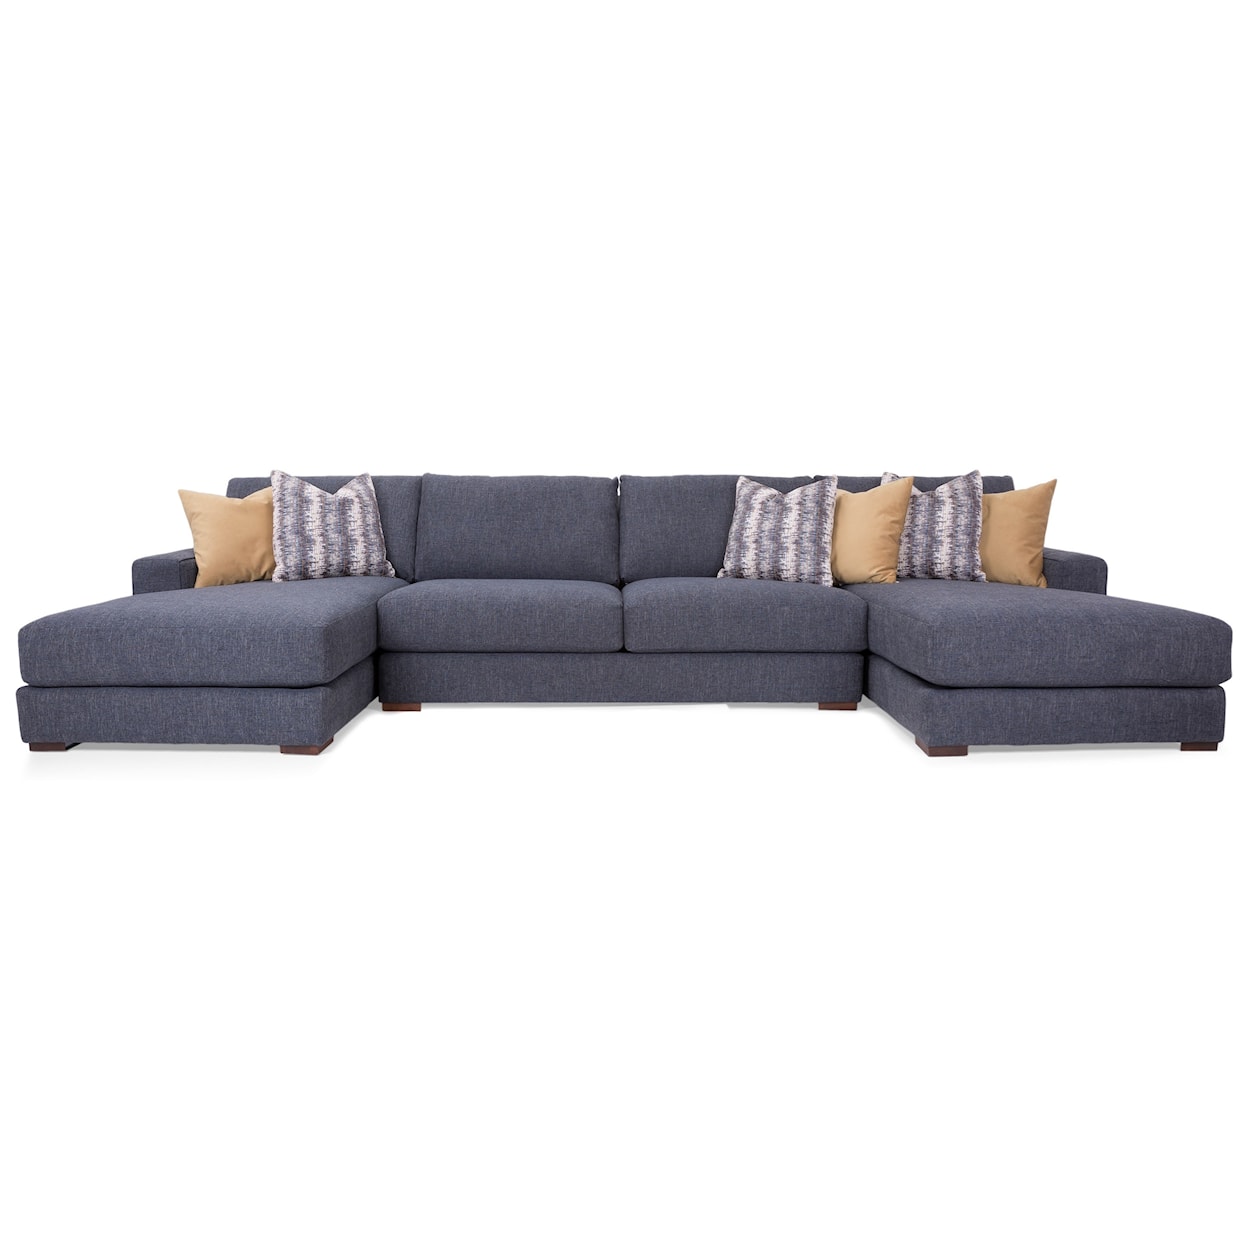 Decor-Rest 2702 4-Seat Sectional Sofa with 2 Chaise Lounges